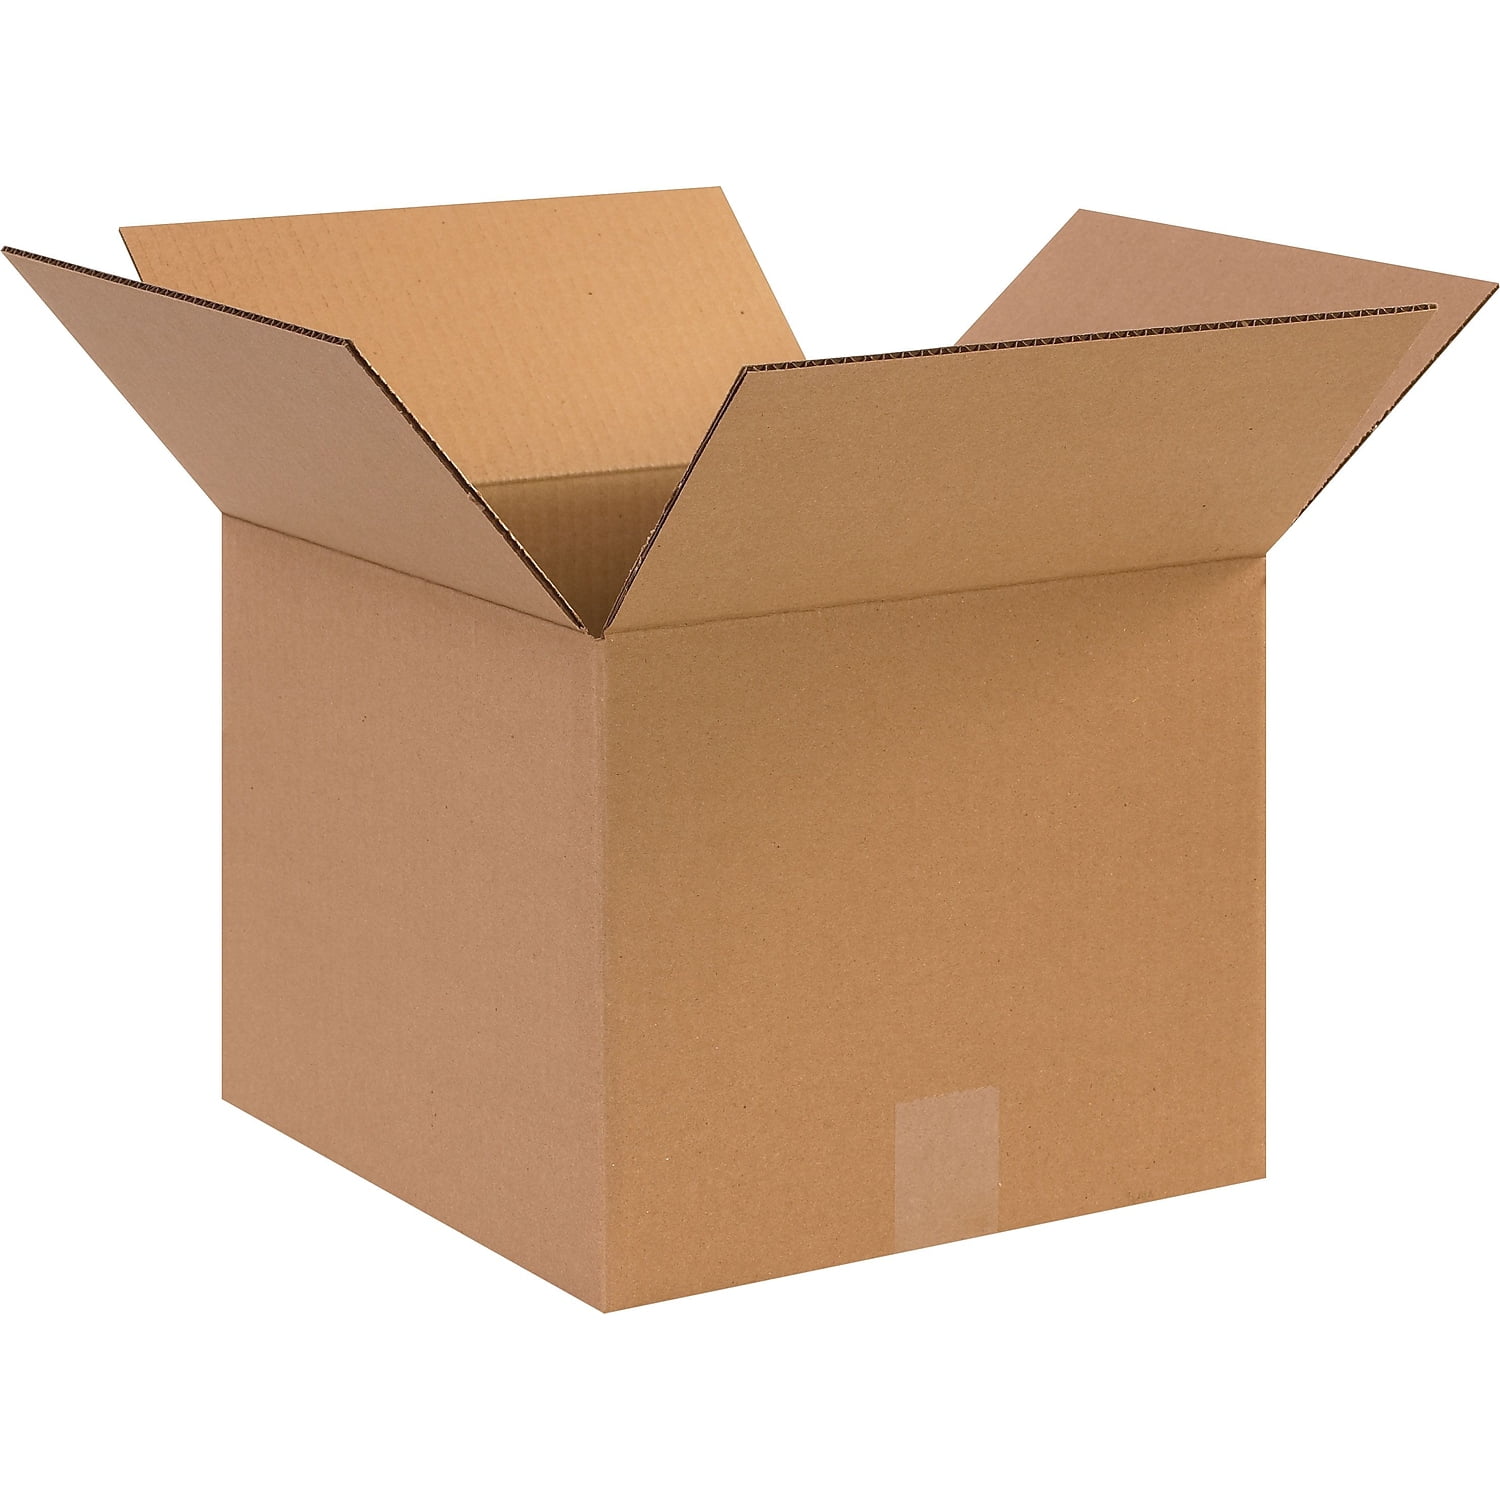 25 4x4x4 Cardboard Paper Boxes Mailing Packing Shipping Box Corrugated Carton 